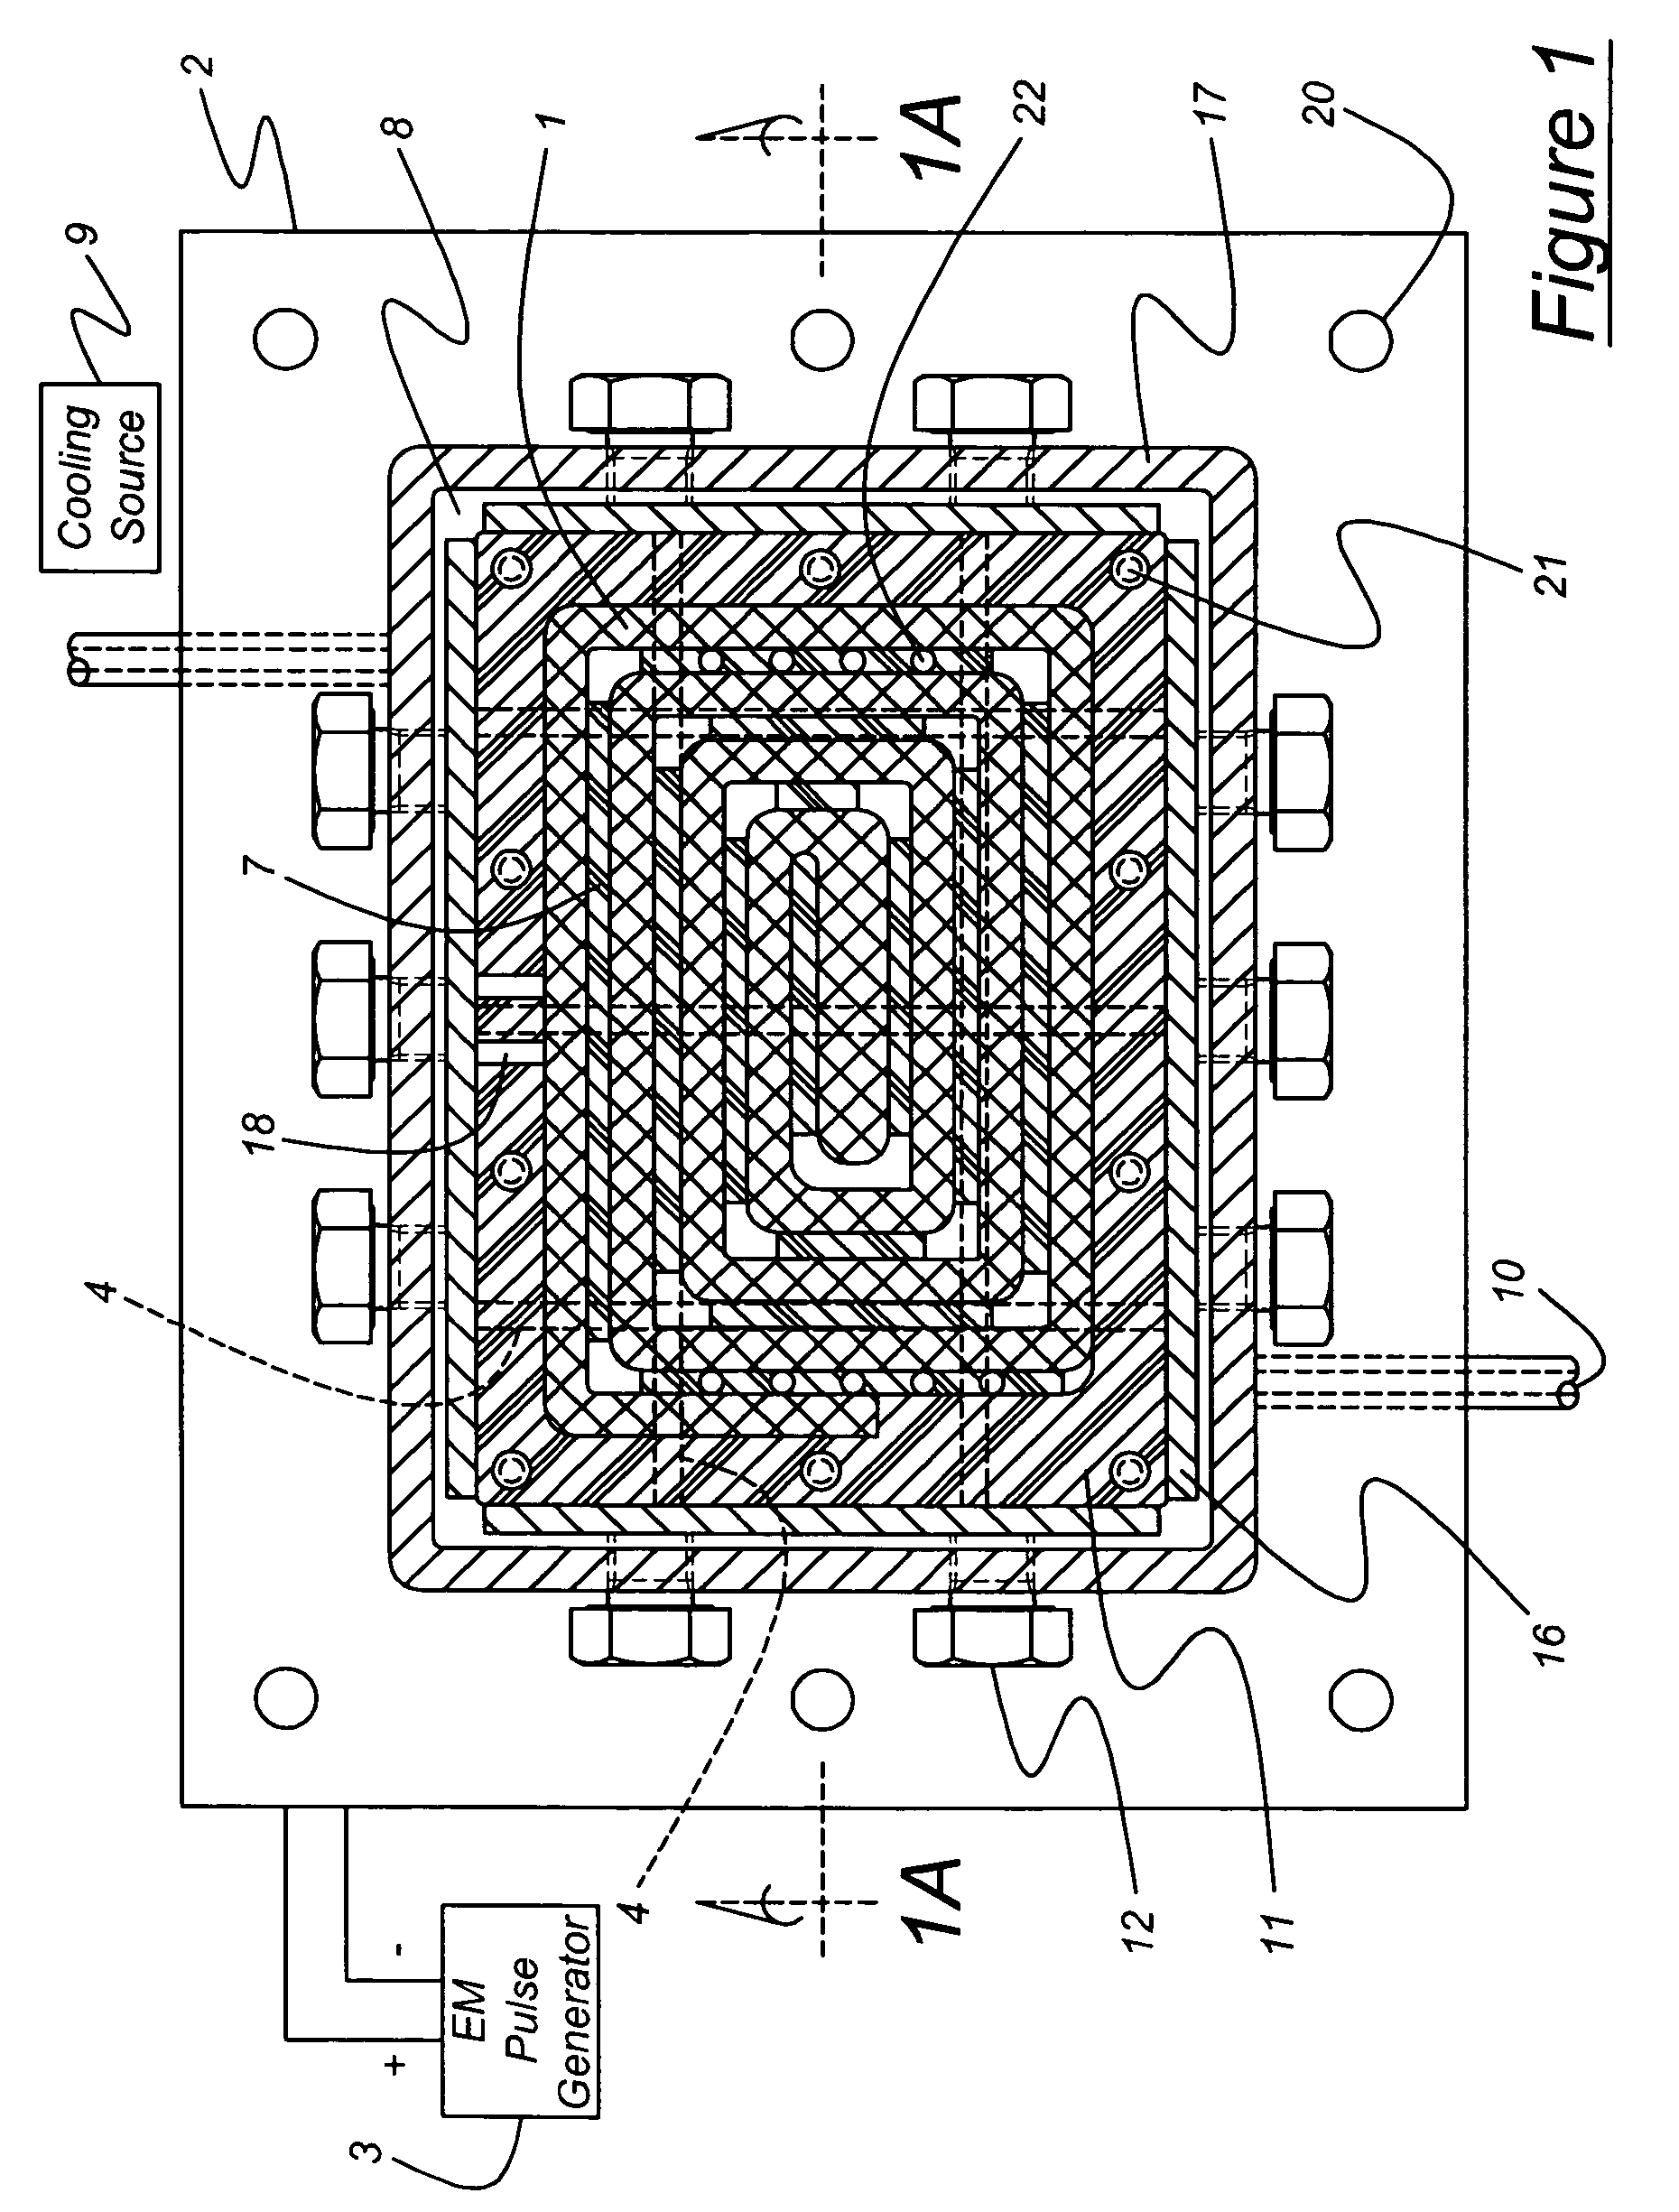 Apparatus for electromagnetic forming with durability and efficiency enhancements